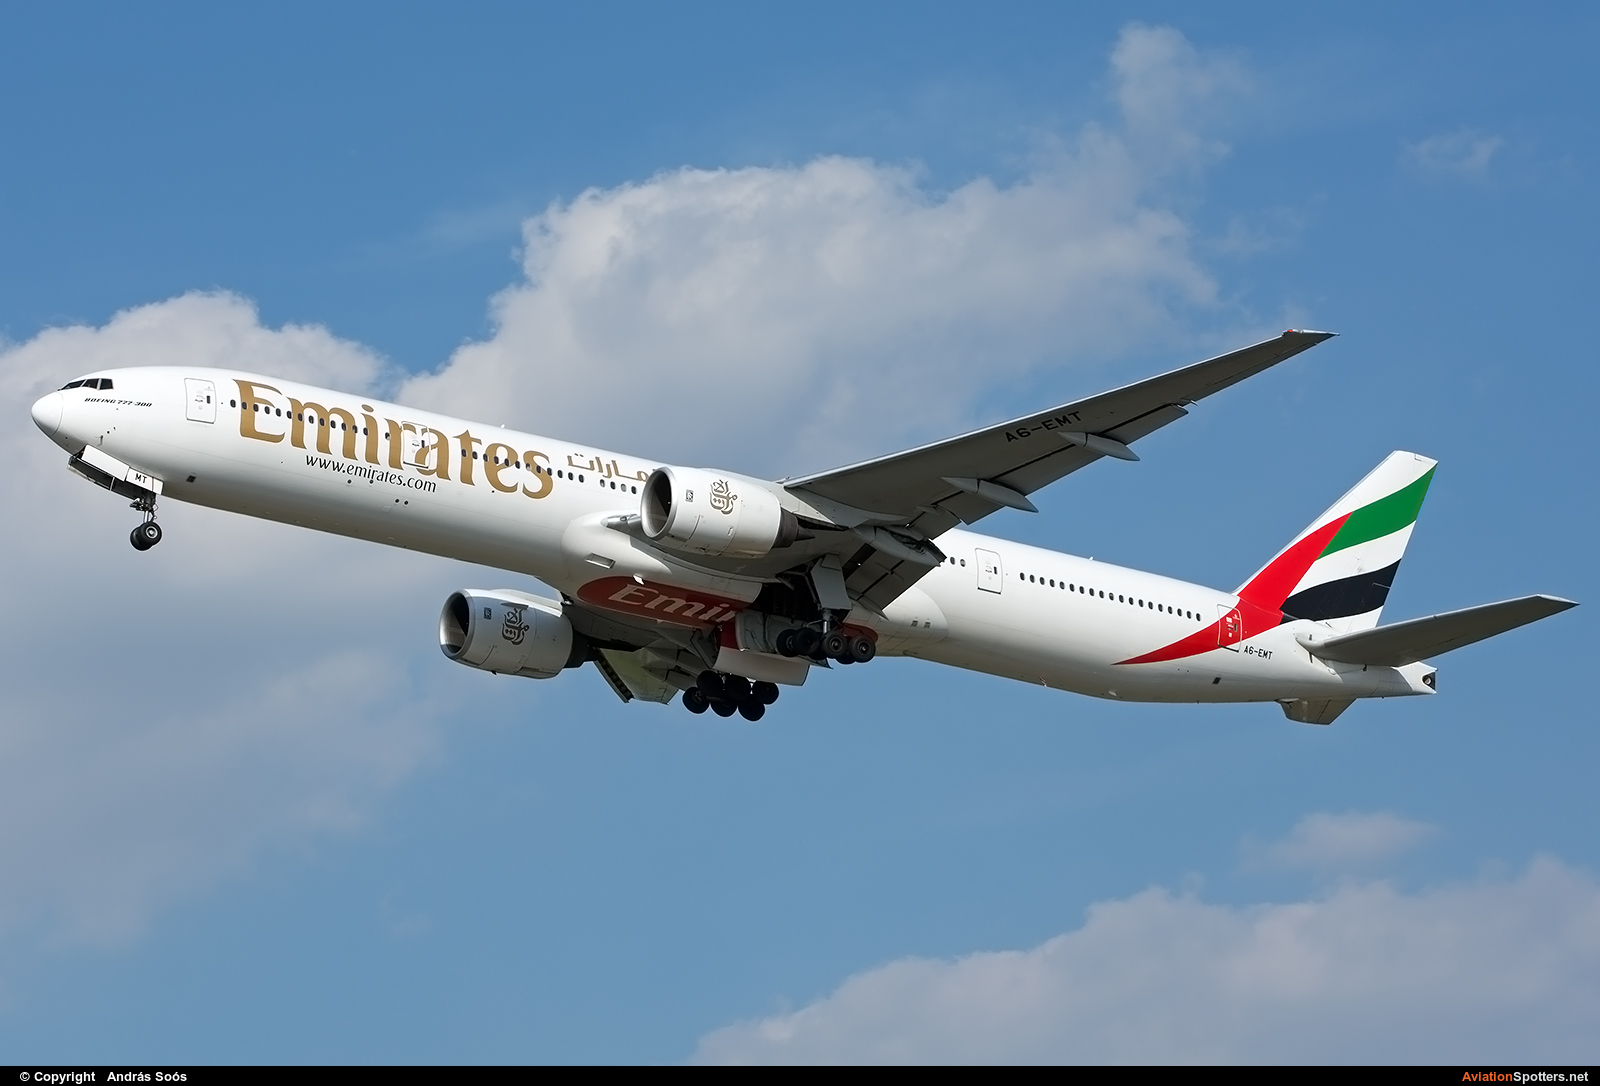 Emirates Airlines  -  777-300  (A6-EMT) By András Soós (sas1965)